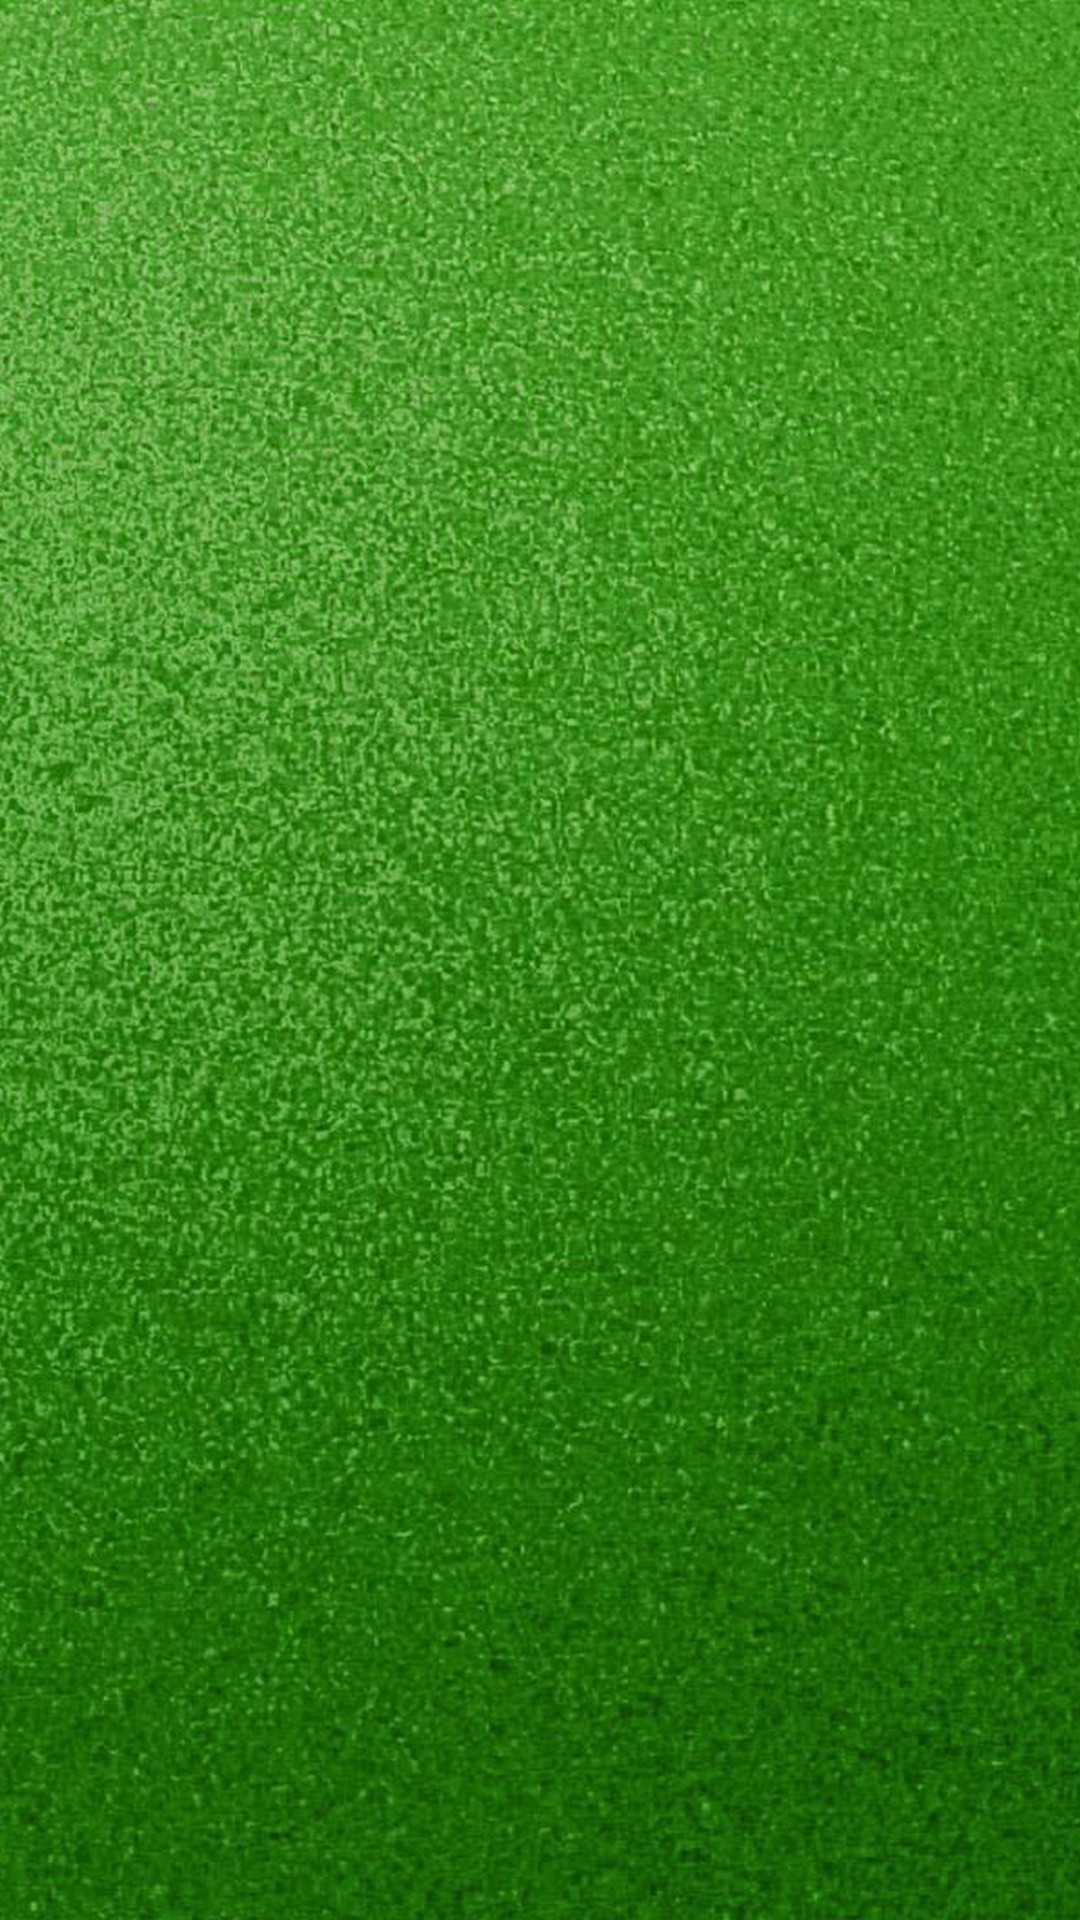 iPhone 8 Wallpaper Dark Green with image resolution 1080x1920 pixel. You can make this wallpaper for your iPhone 5, 6, 7, 8, X backgrounds, Mobile Screensaver, or iPad Lock Screen